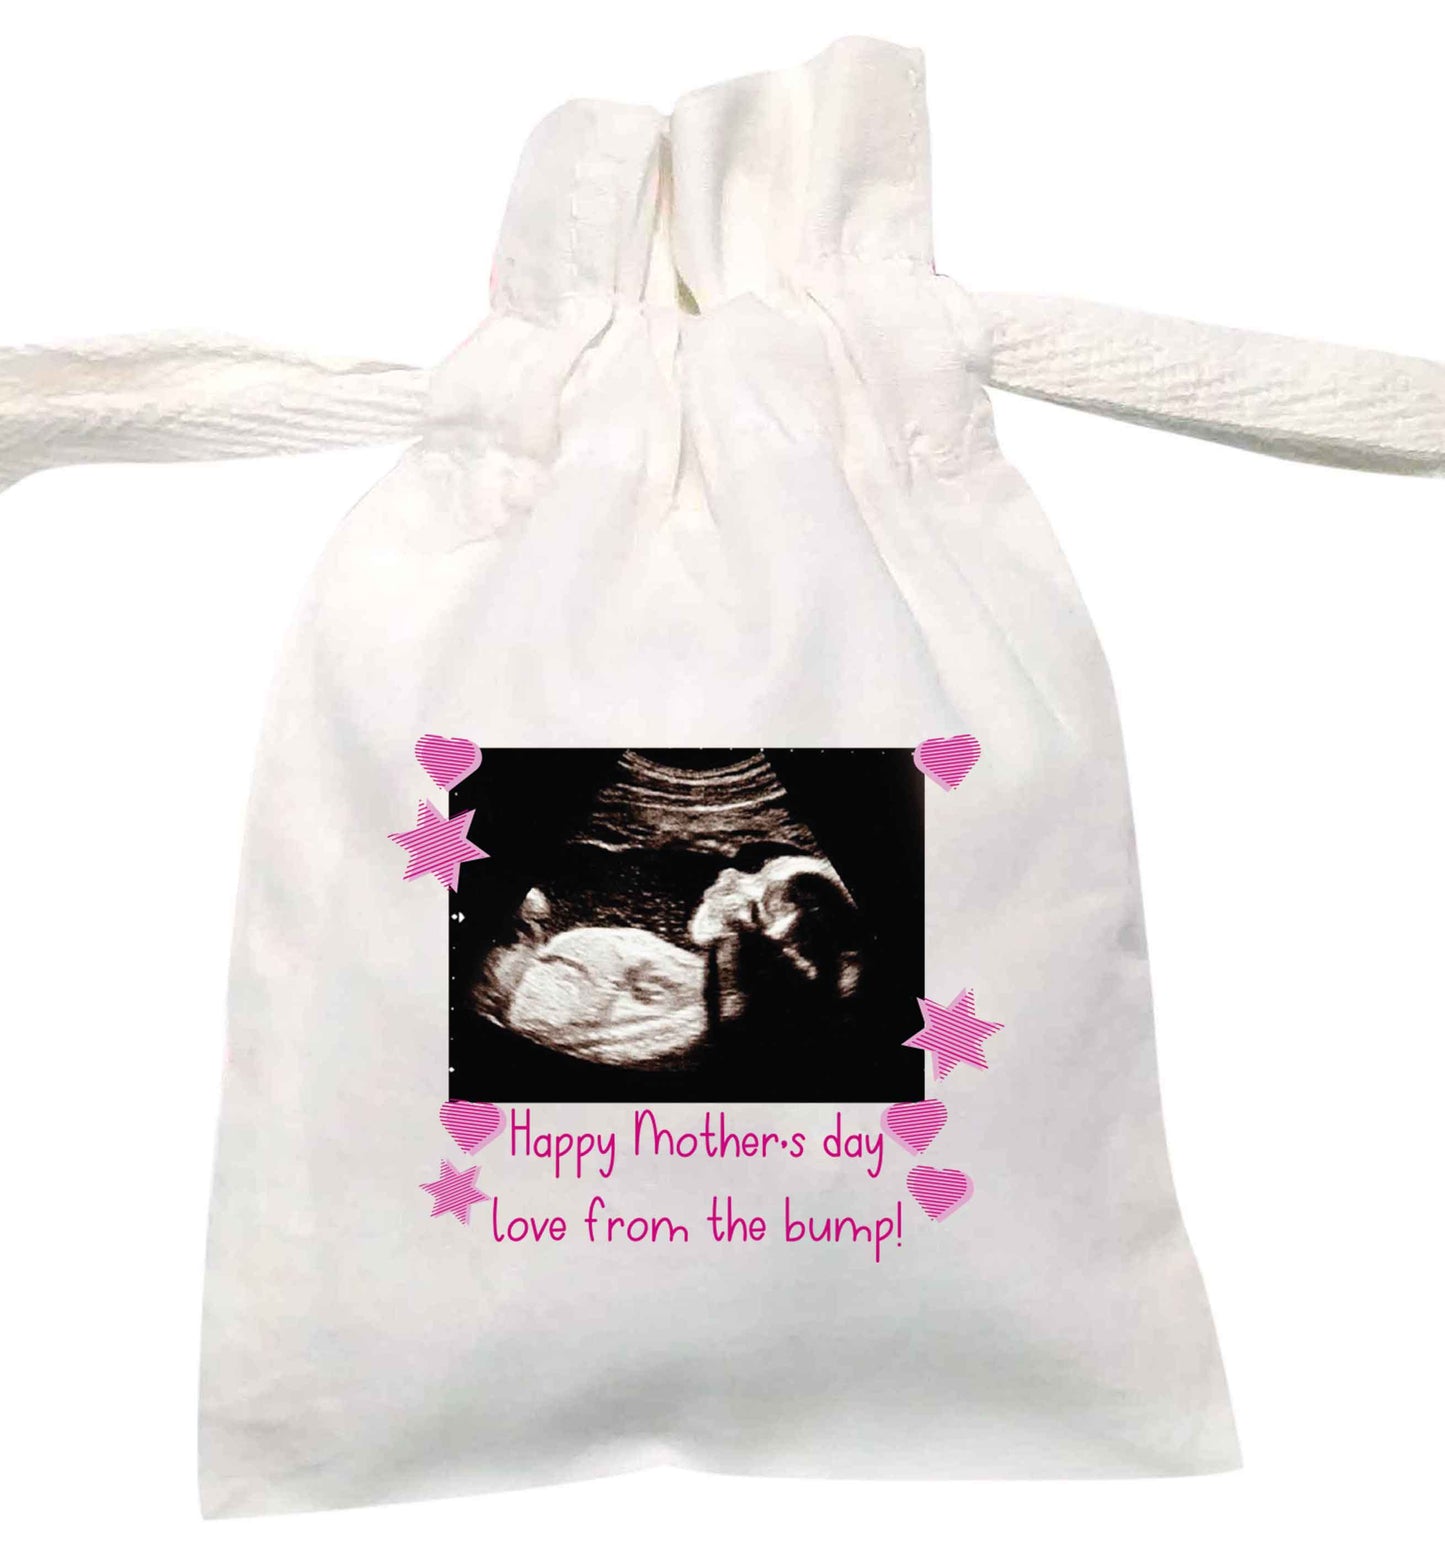 Happy Mother's day love from the bump - pink  | XS - L | Pouch / Drawstring bag / Sack | Organic Cotton | Bulk discounts available!